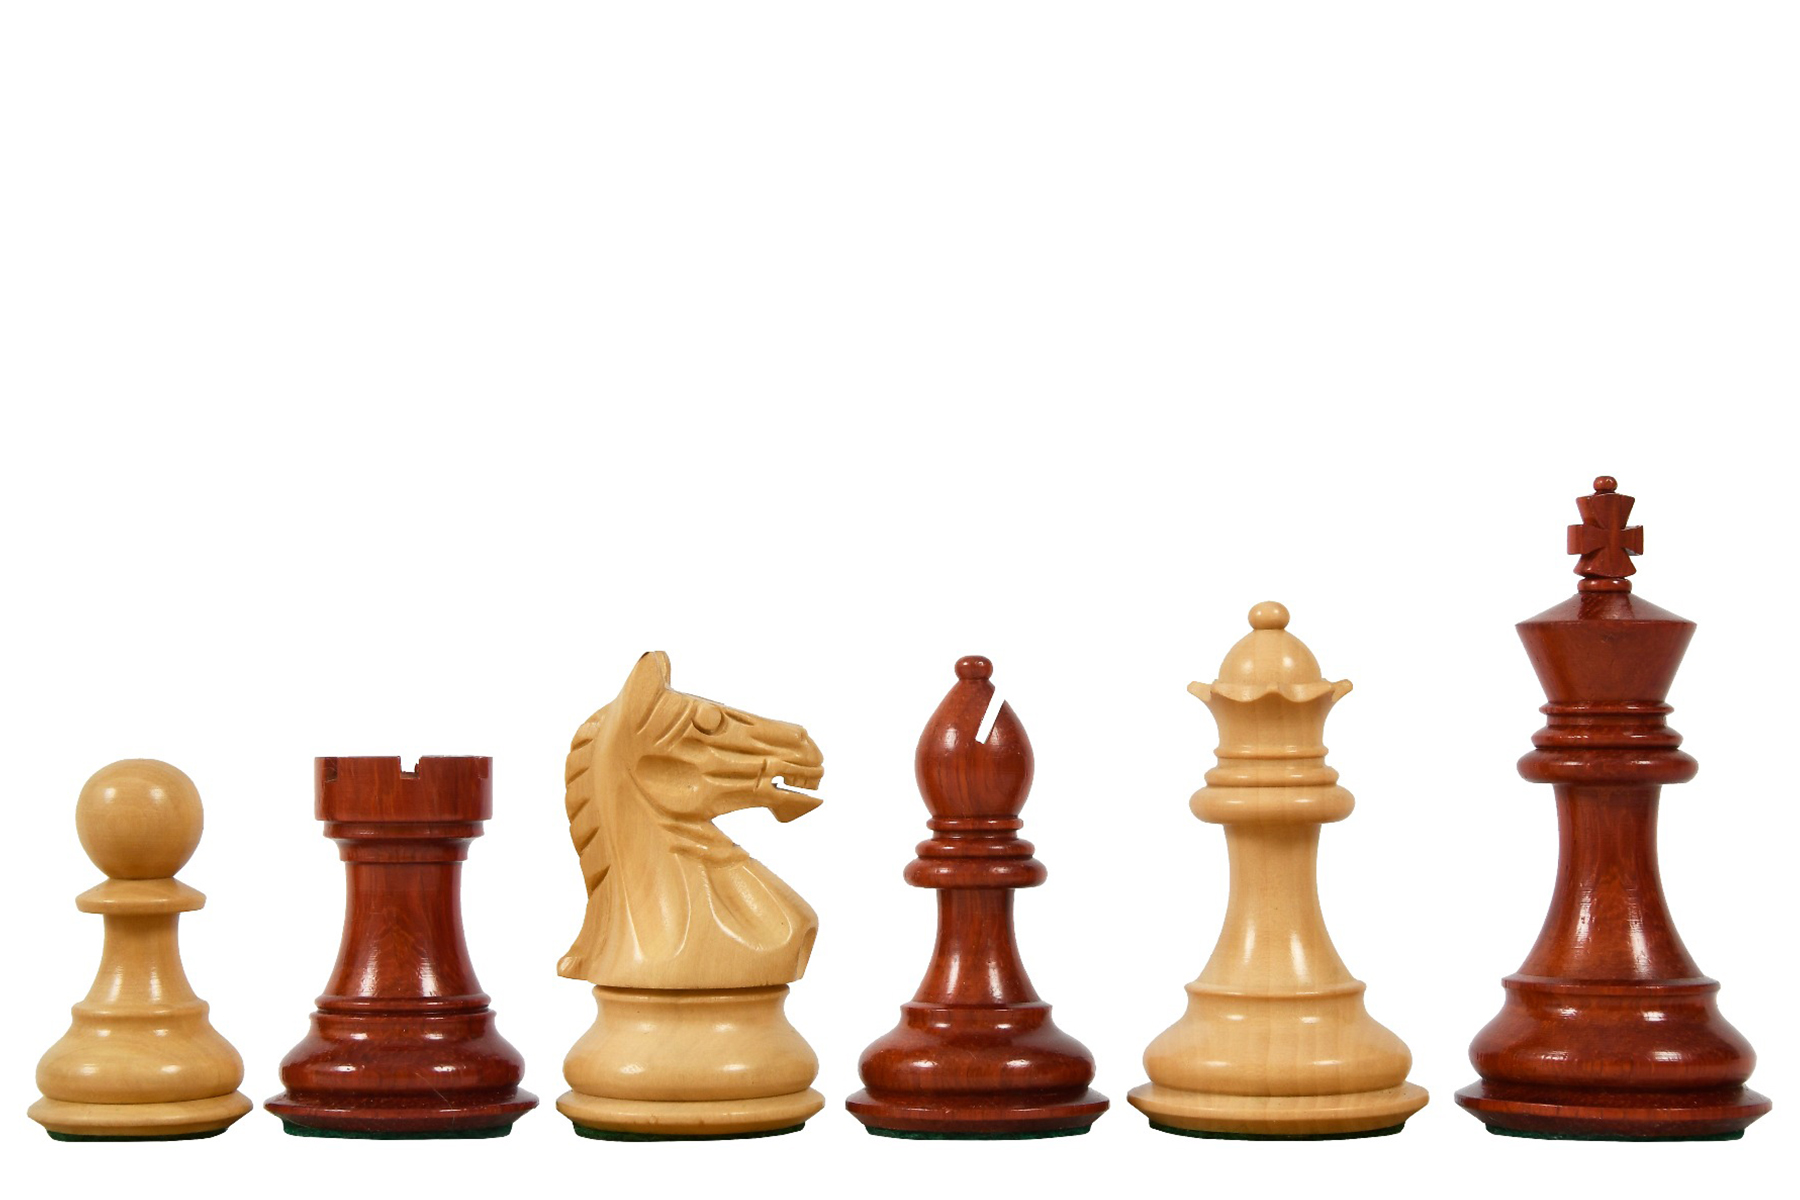 WOODEN LARGE PALISANDER CHESS SET CLASSIC STAUNTON HANDMADE WEIGHTED PIECES 20" 